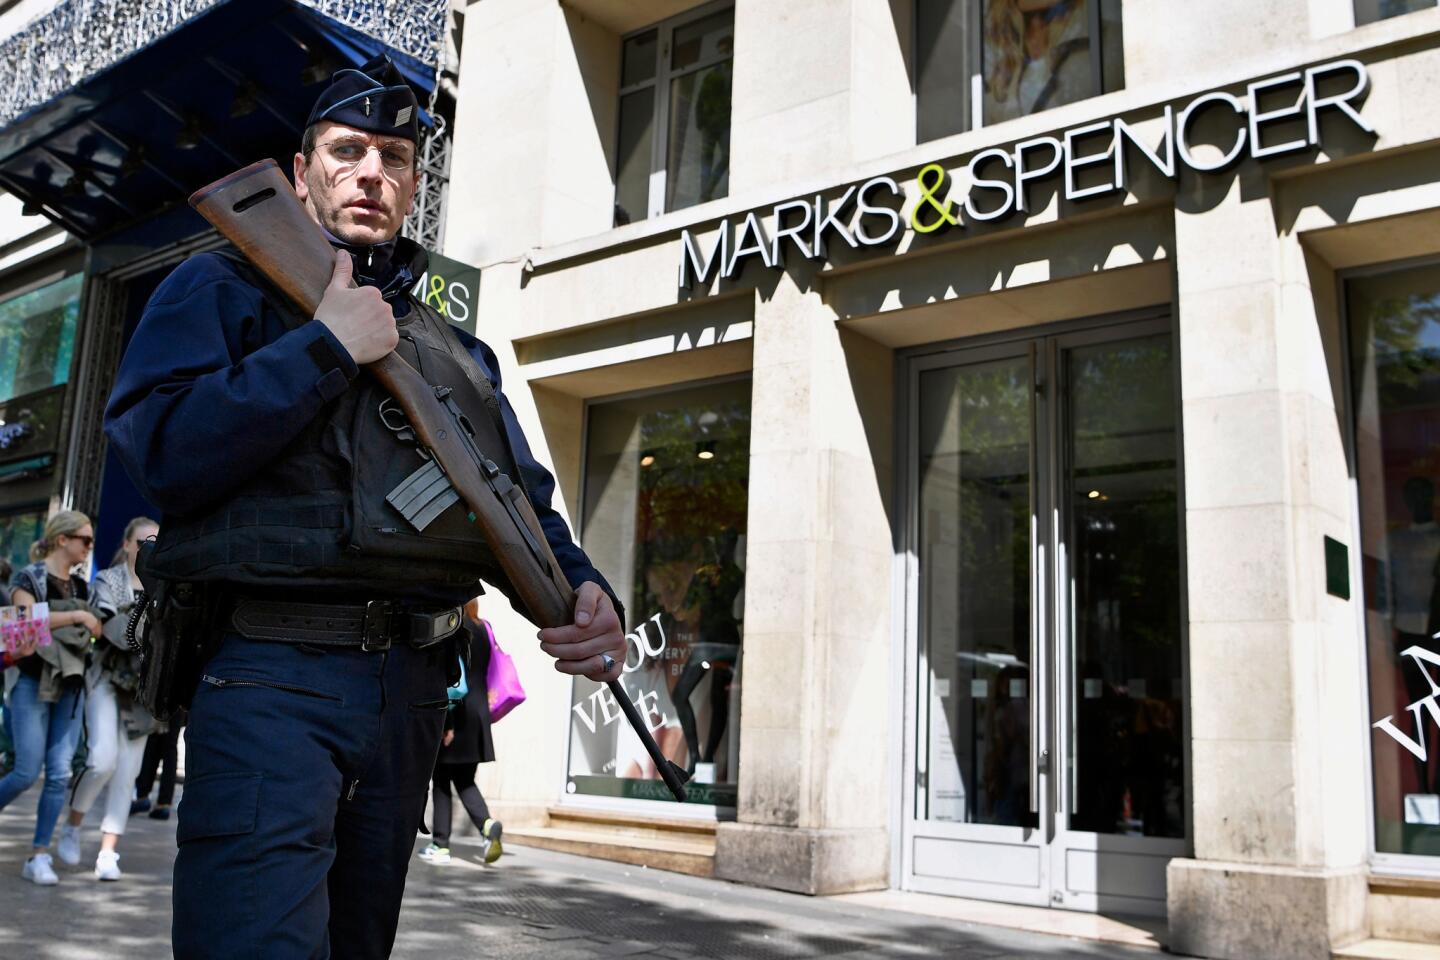 Armed police patrol past a Marks & Spencer on the Champs-Elysees in Paris following the fatal shooting of a police officer on April 21, 2017 in Paris.